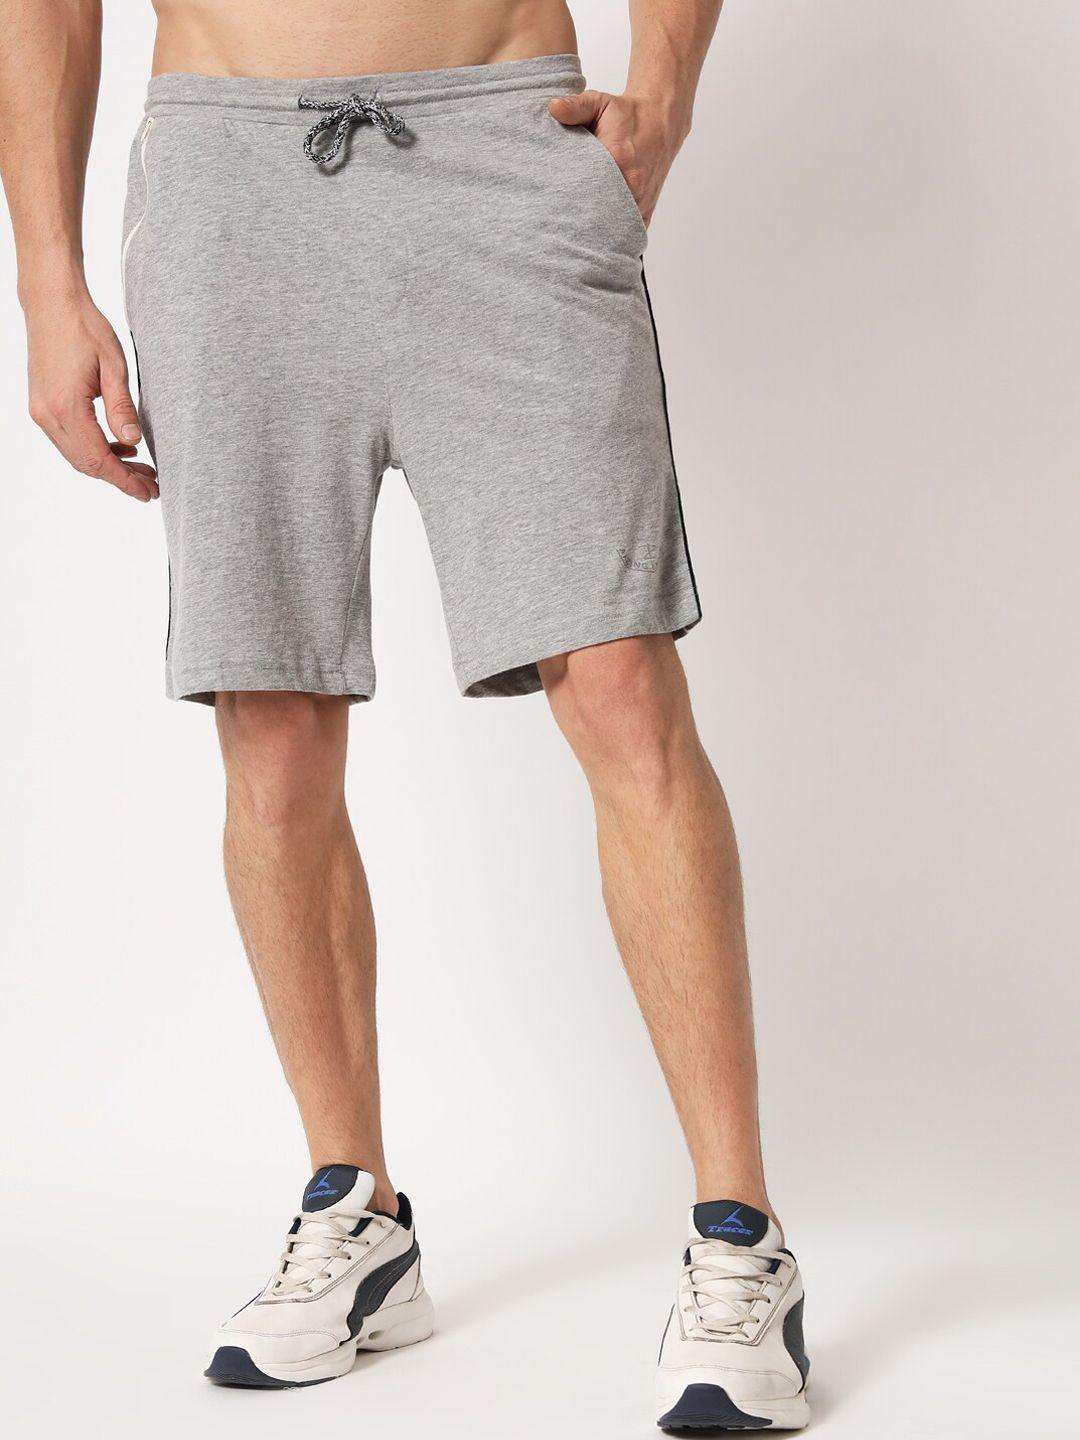 aazing-london-men-grey-solid-cotton-sports-shorts